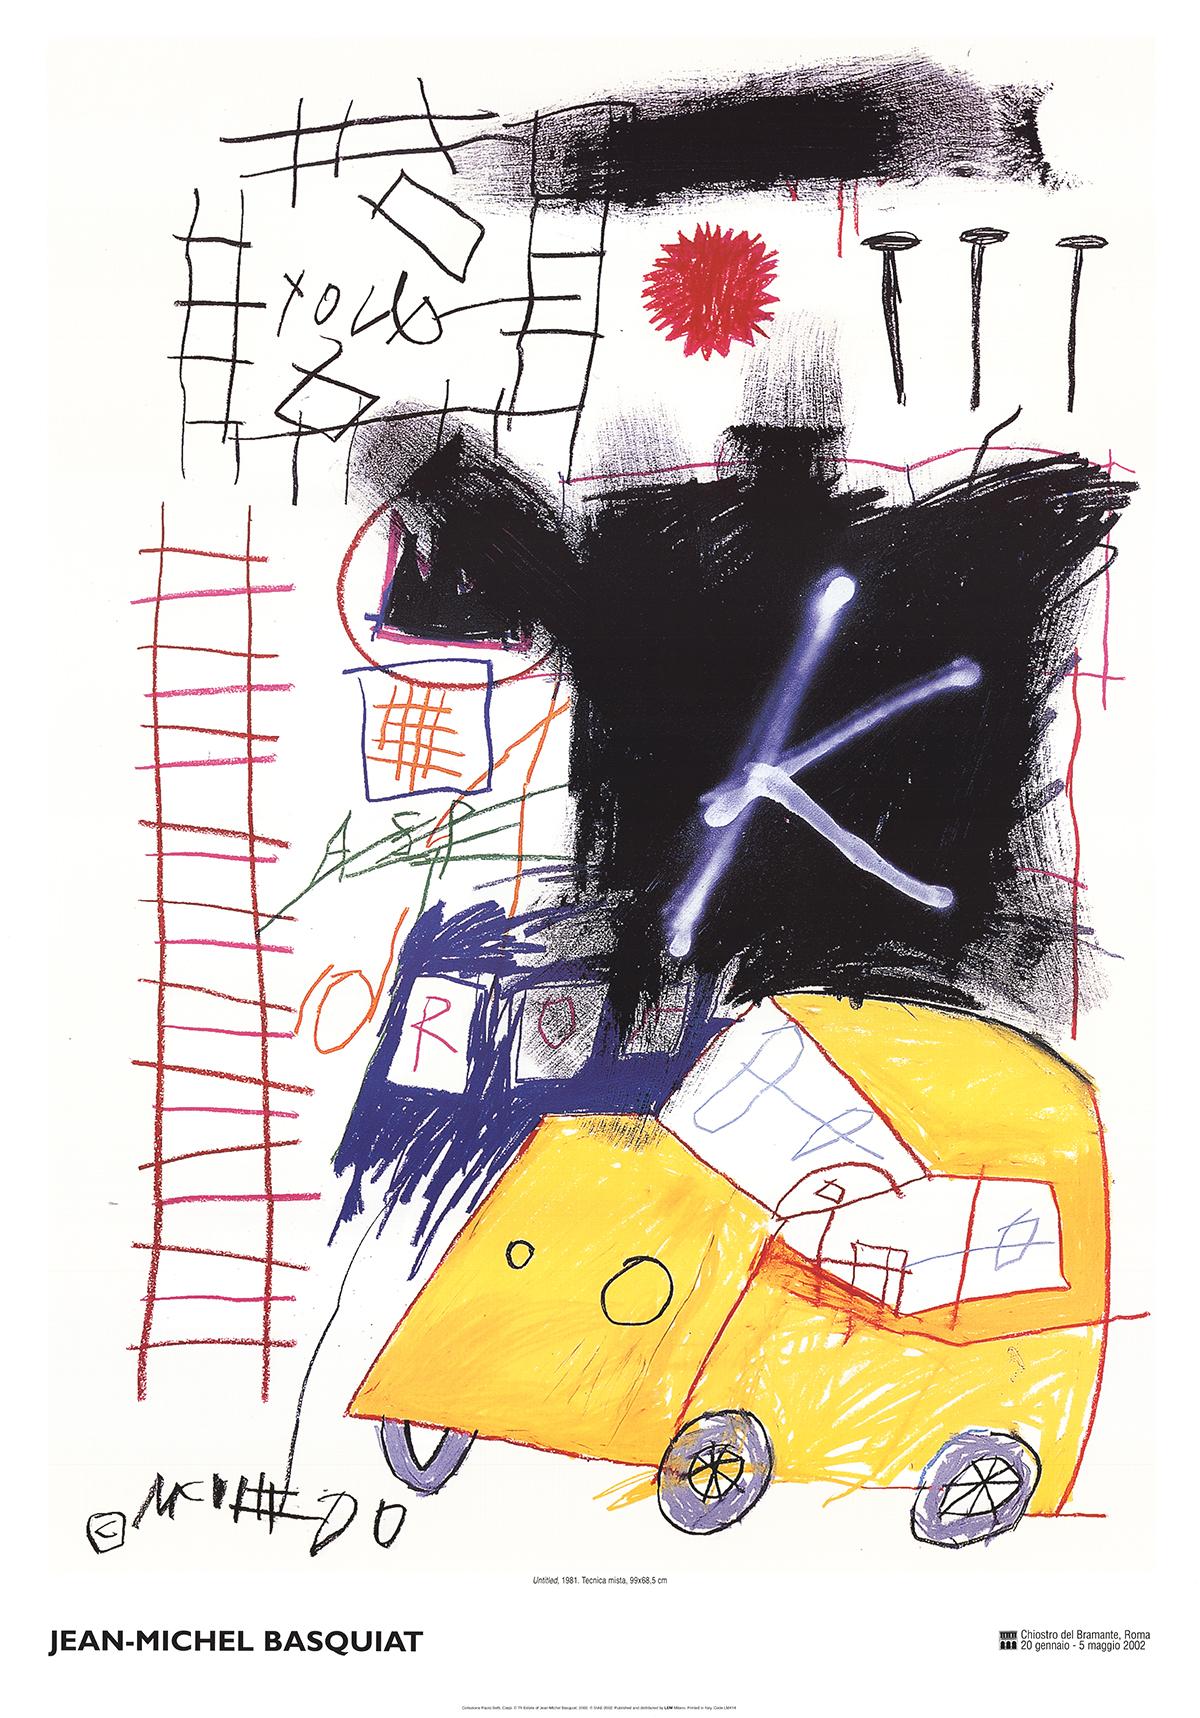 Jean-Michel Basquiat - City Taxi - 2002 Offset Lithograph 39.5" x 27.5" - Print by after Jean-Michel Basquiat